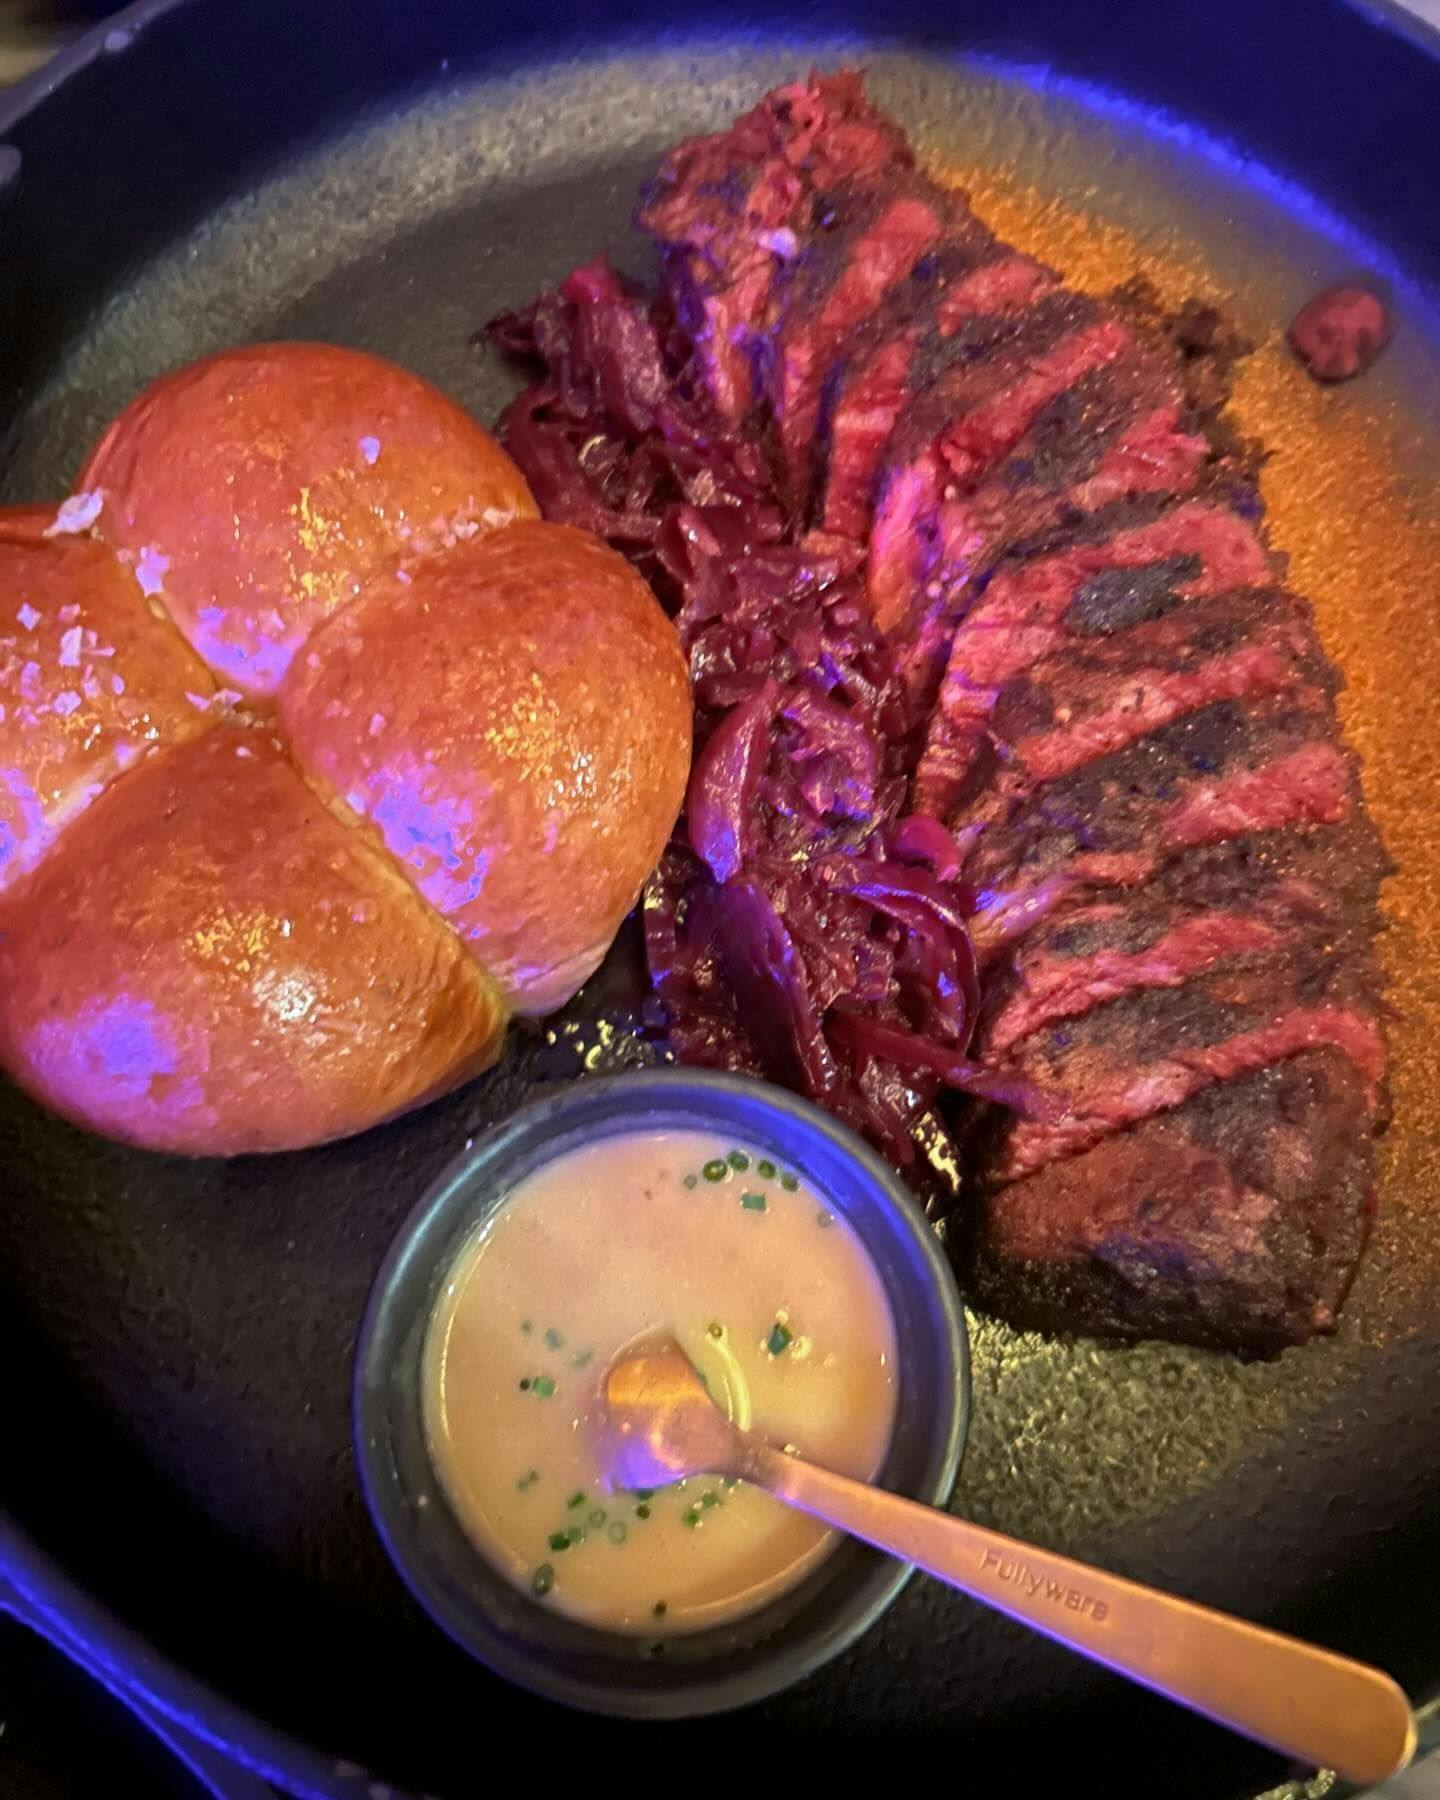 Perfectly grilled steak sliced and served alongside golden brioche rolls and braised red cabbage, complete with a side of creamy sauce, embodying the fine dining experiences accessible with Booked in New York.